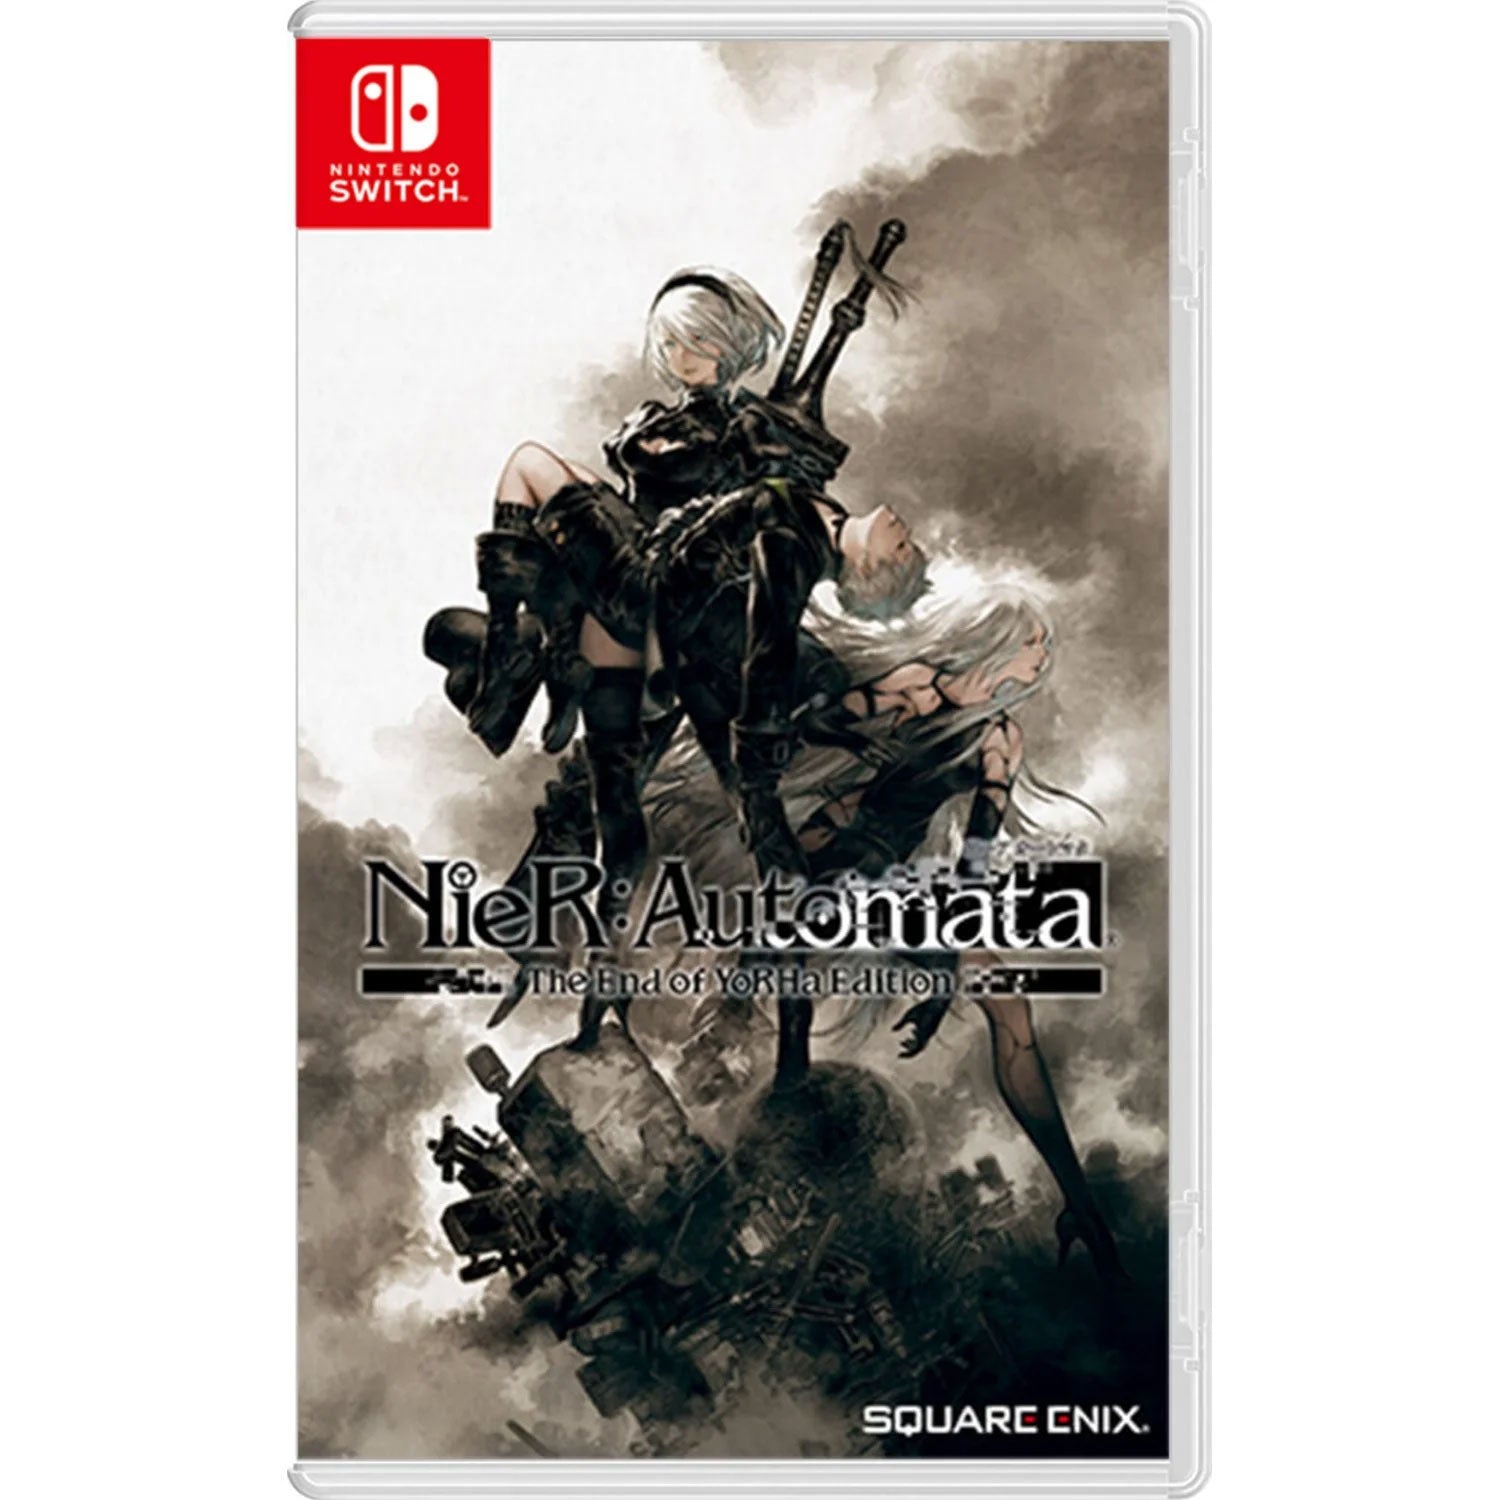 Nier: Automata is coming to Nintendo Switch this October